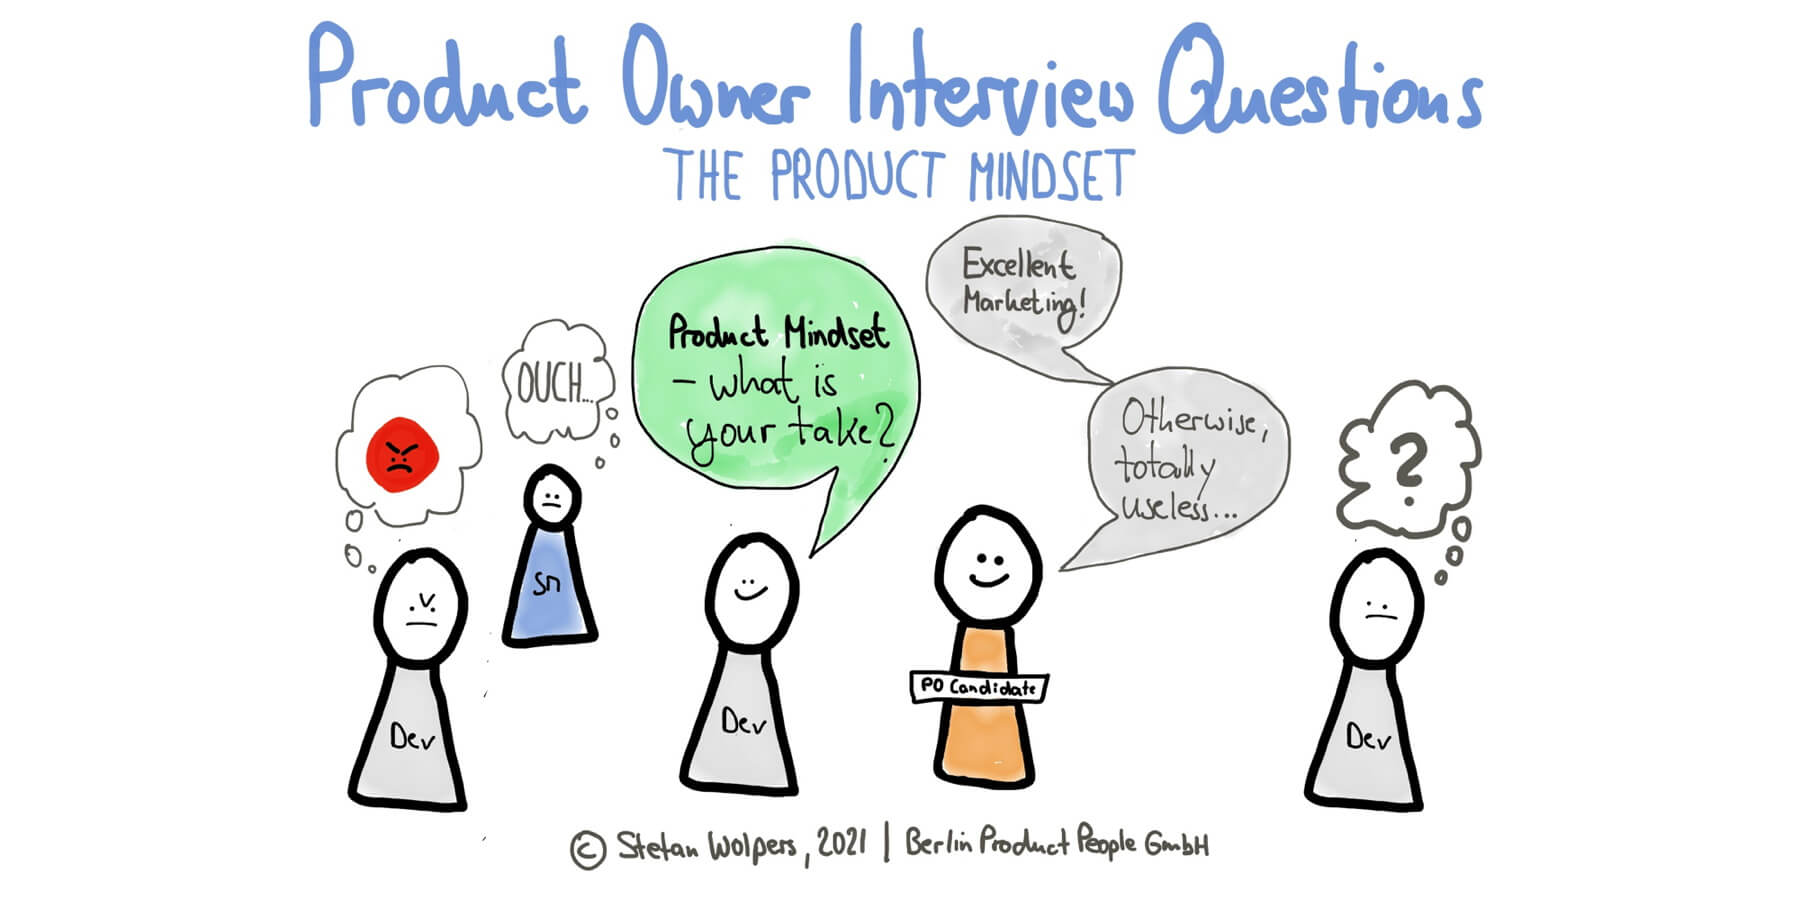 Product Owner Interview Guide: The Product Mindset — Berlin Product People GmbH